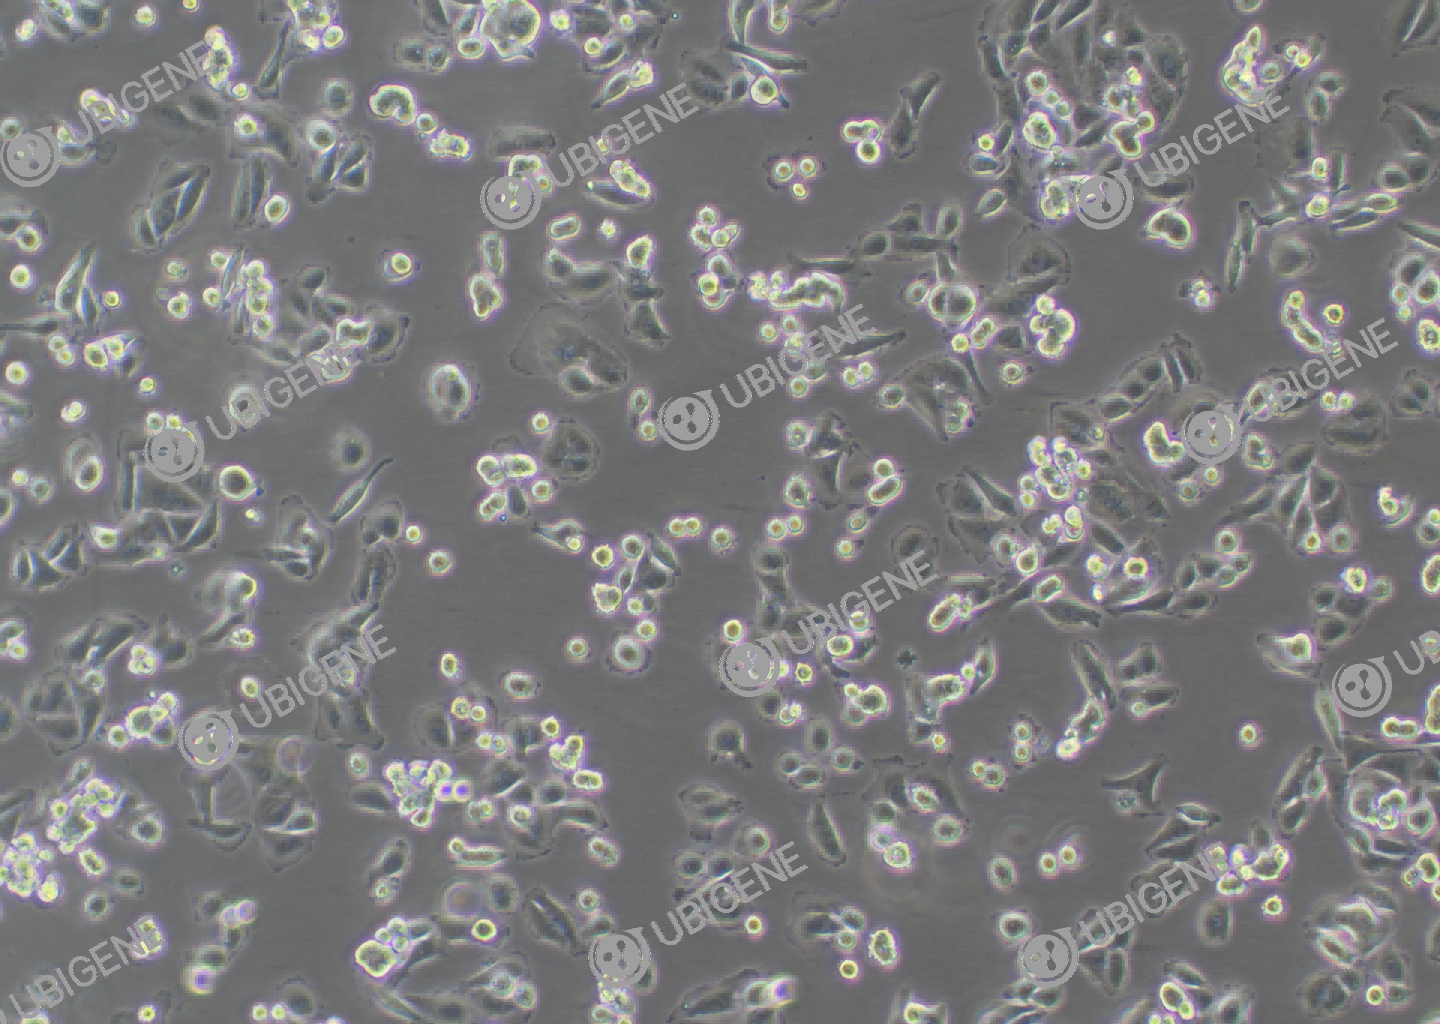 SW480 cell line Cultured cell morphology